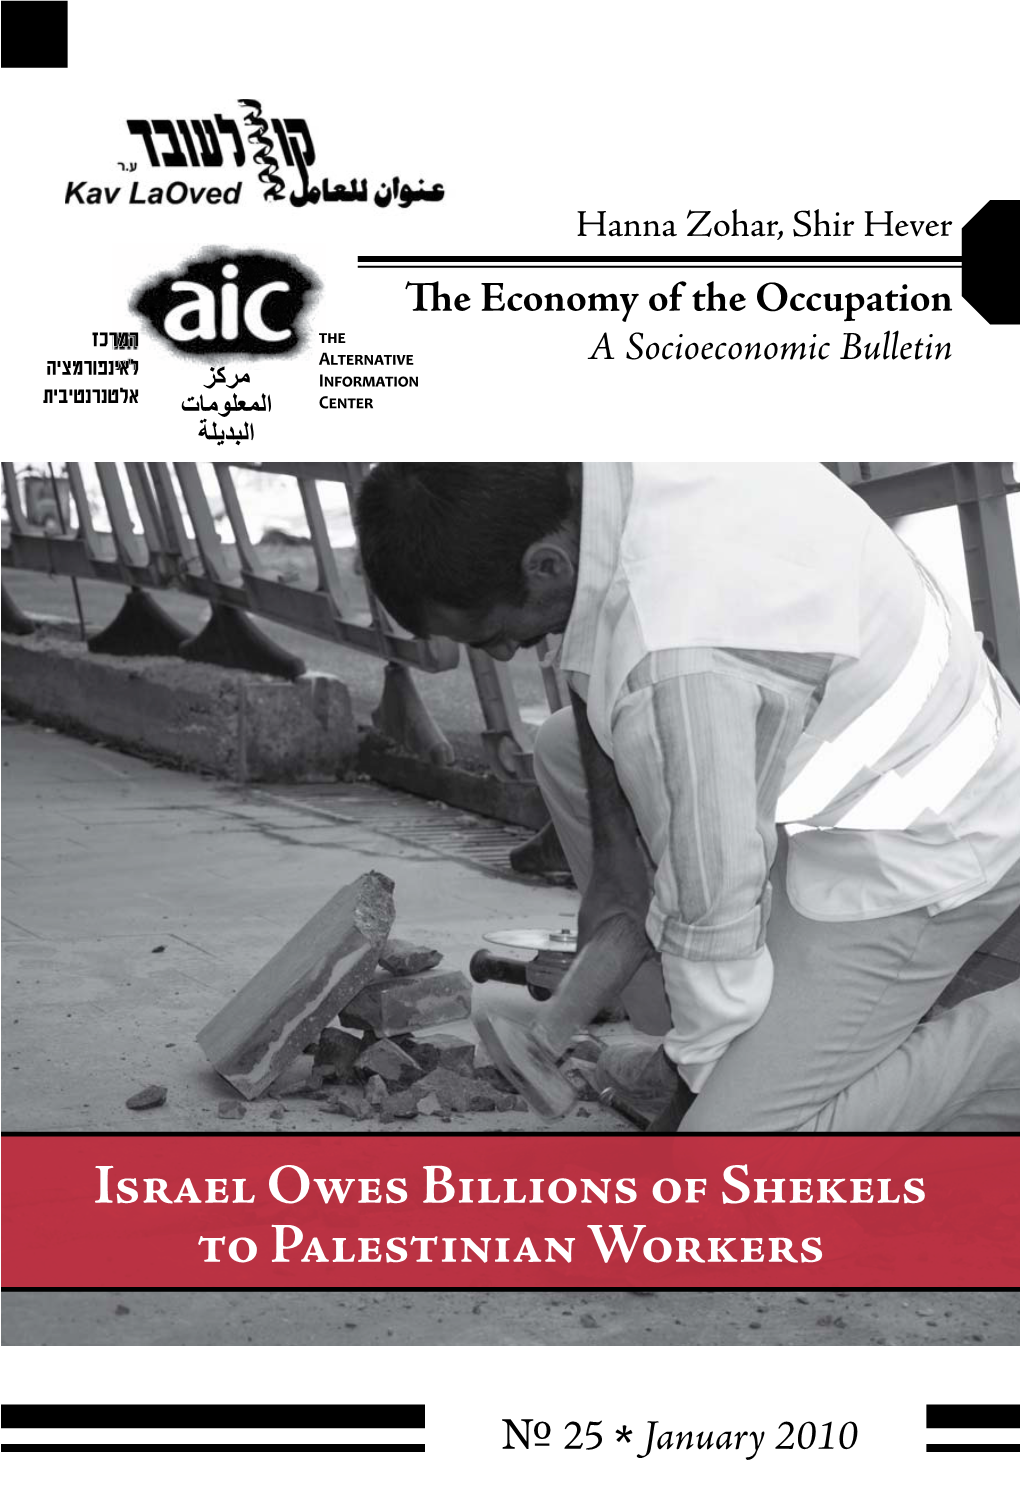 Israel Owes Billions of Shekels to Palestinian Workers